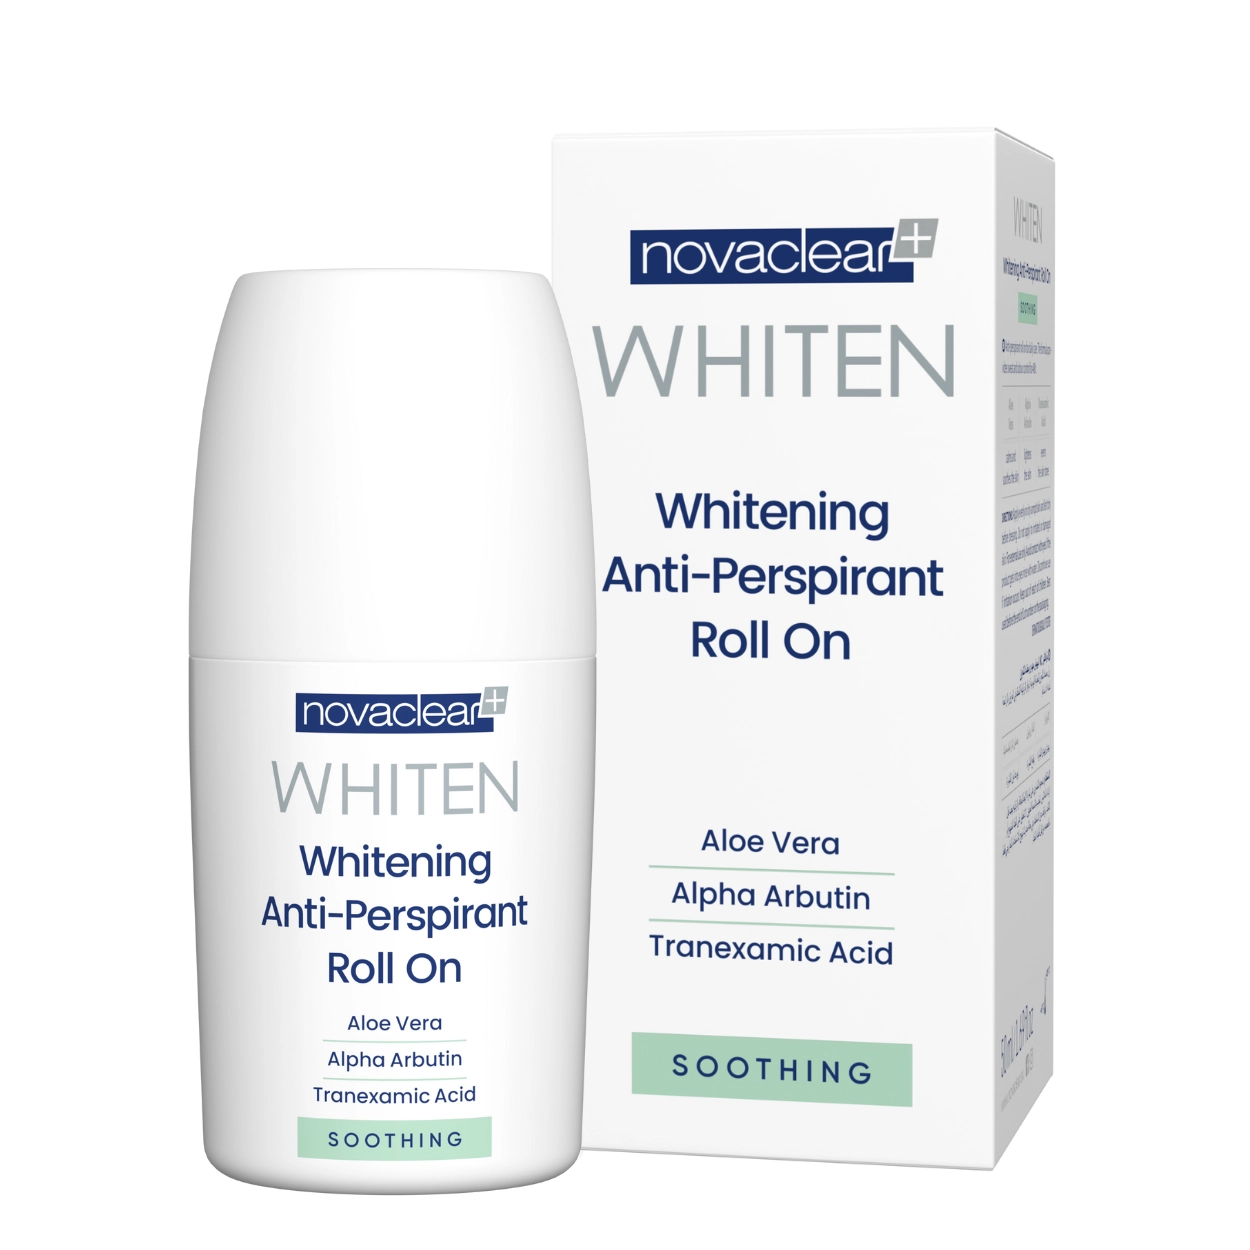 novaclear-whiten-whitening-anti-perspirant-roll-on-soothing